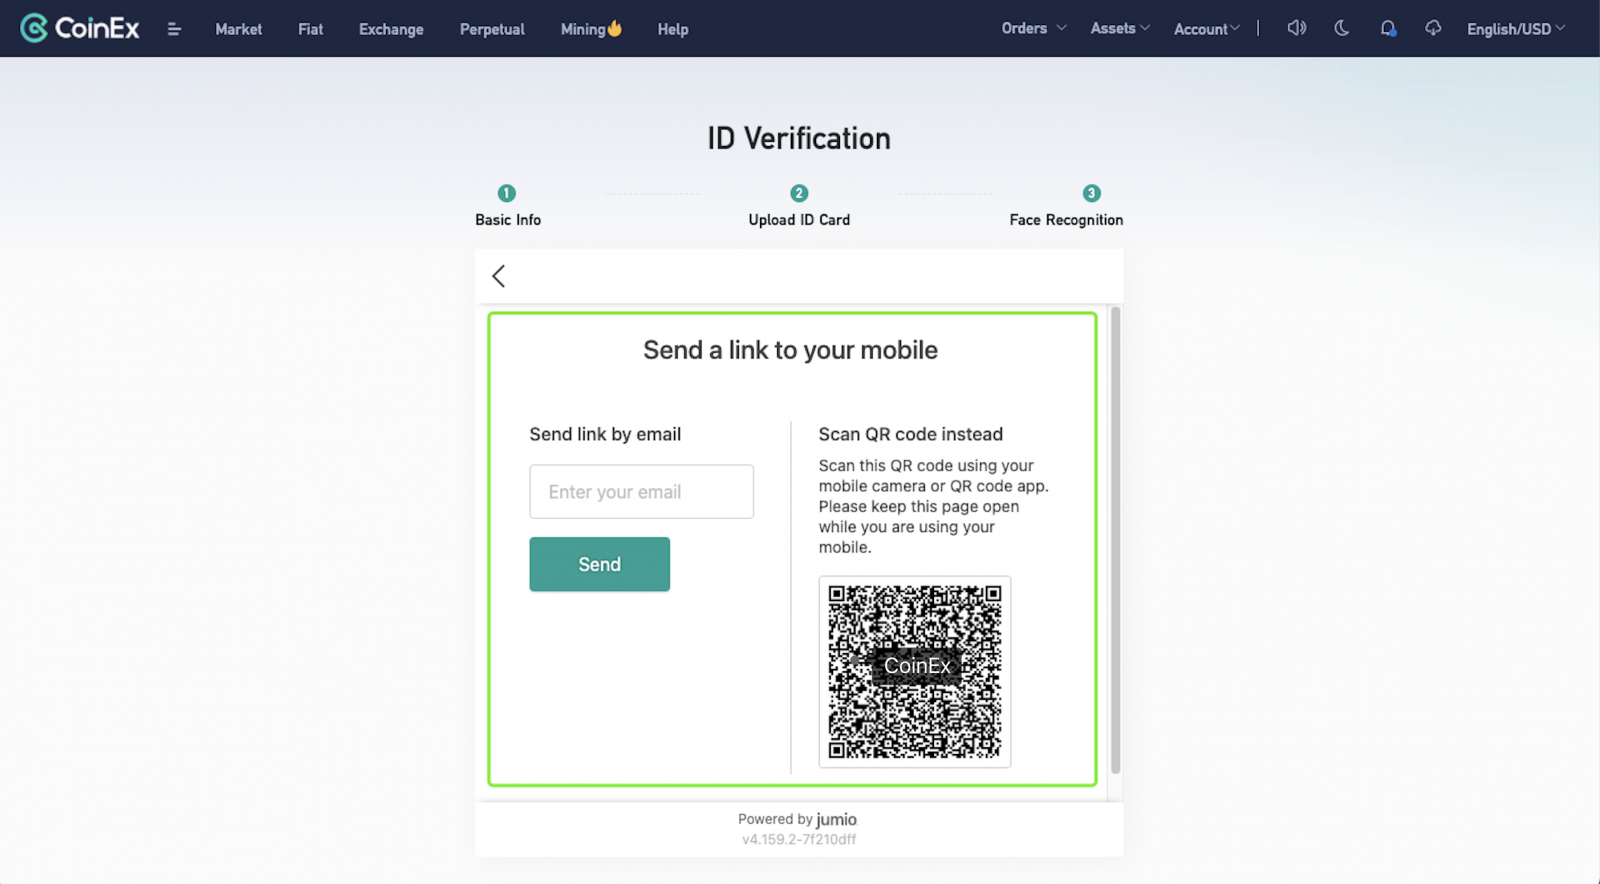 How to Verify Account in CoinEx